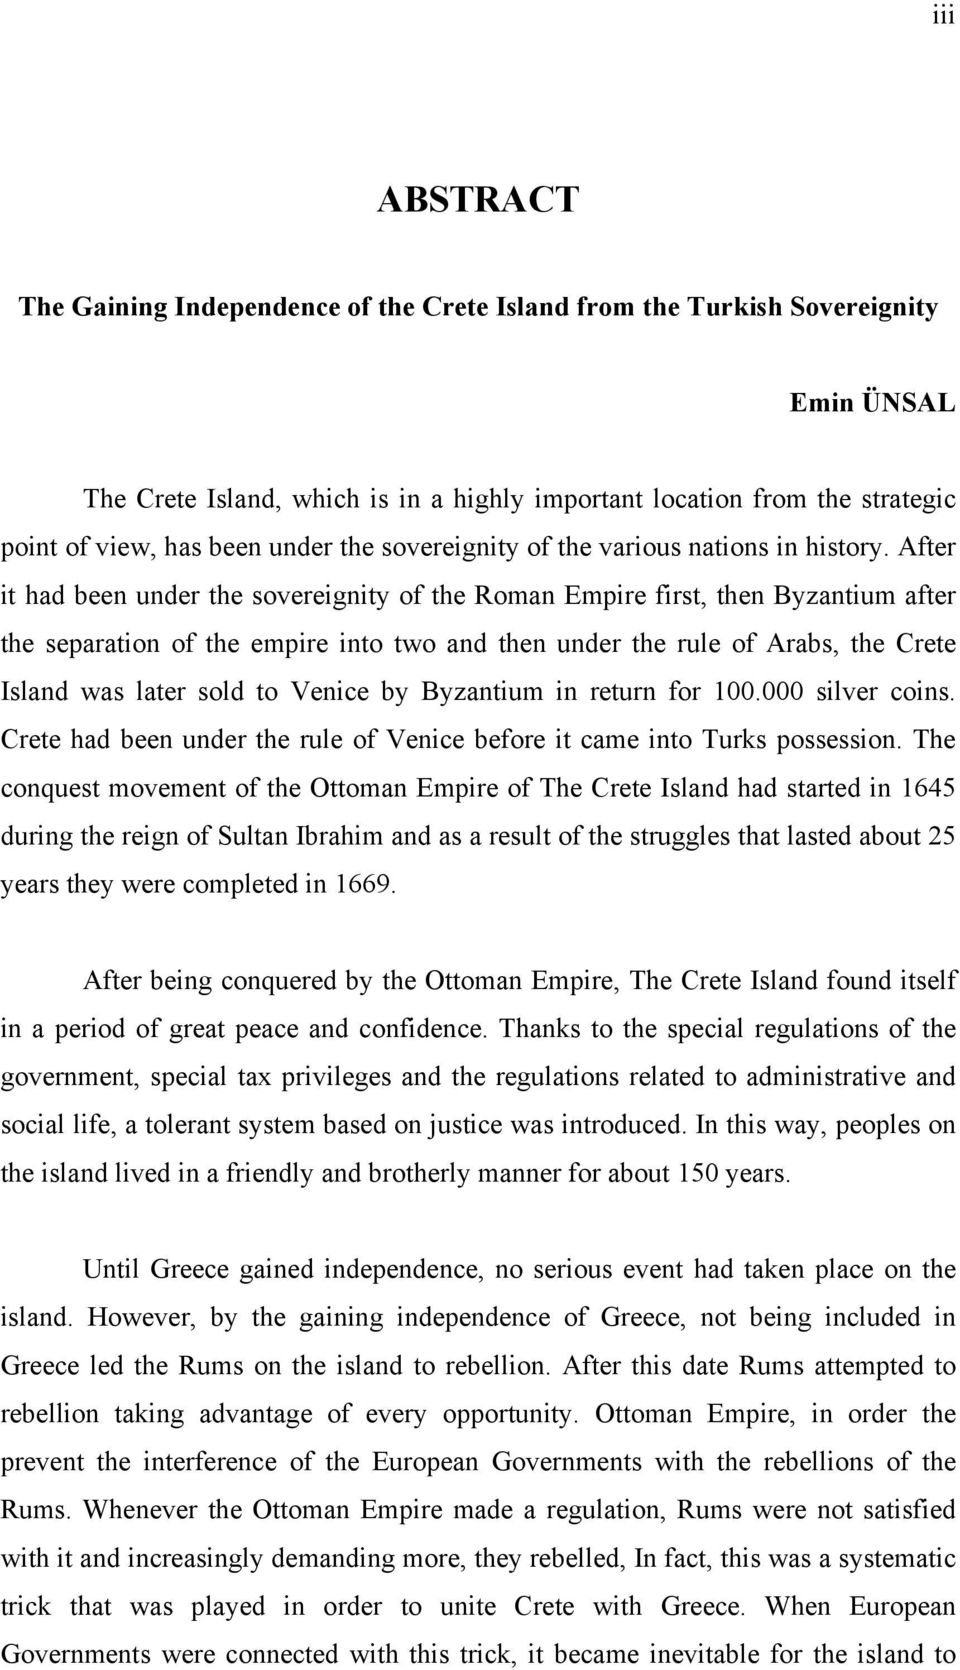 After it had been under the sovereignity of the Roman Empire first, then Byzantium after the separation of the empire into two and then under the rule of Arabs, the Crete Island was later sold to